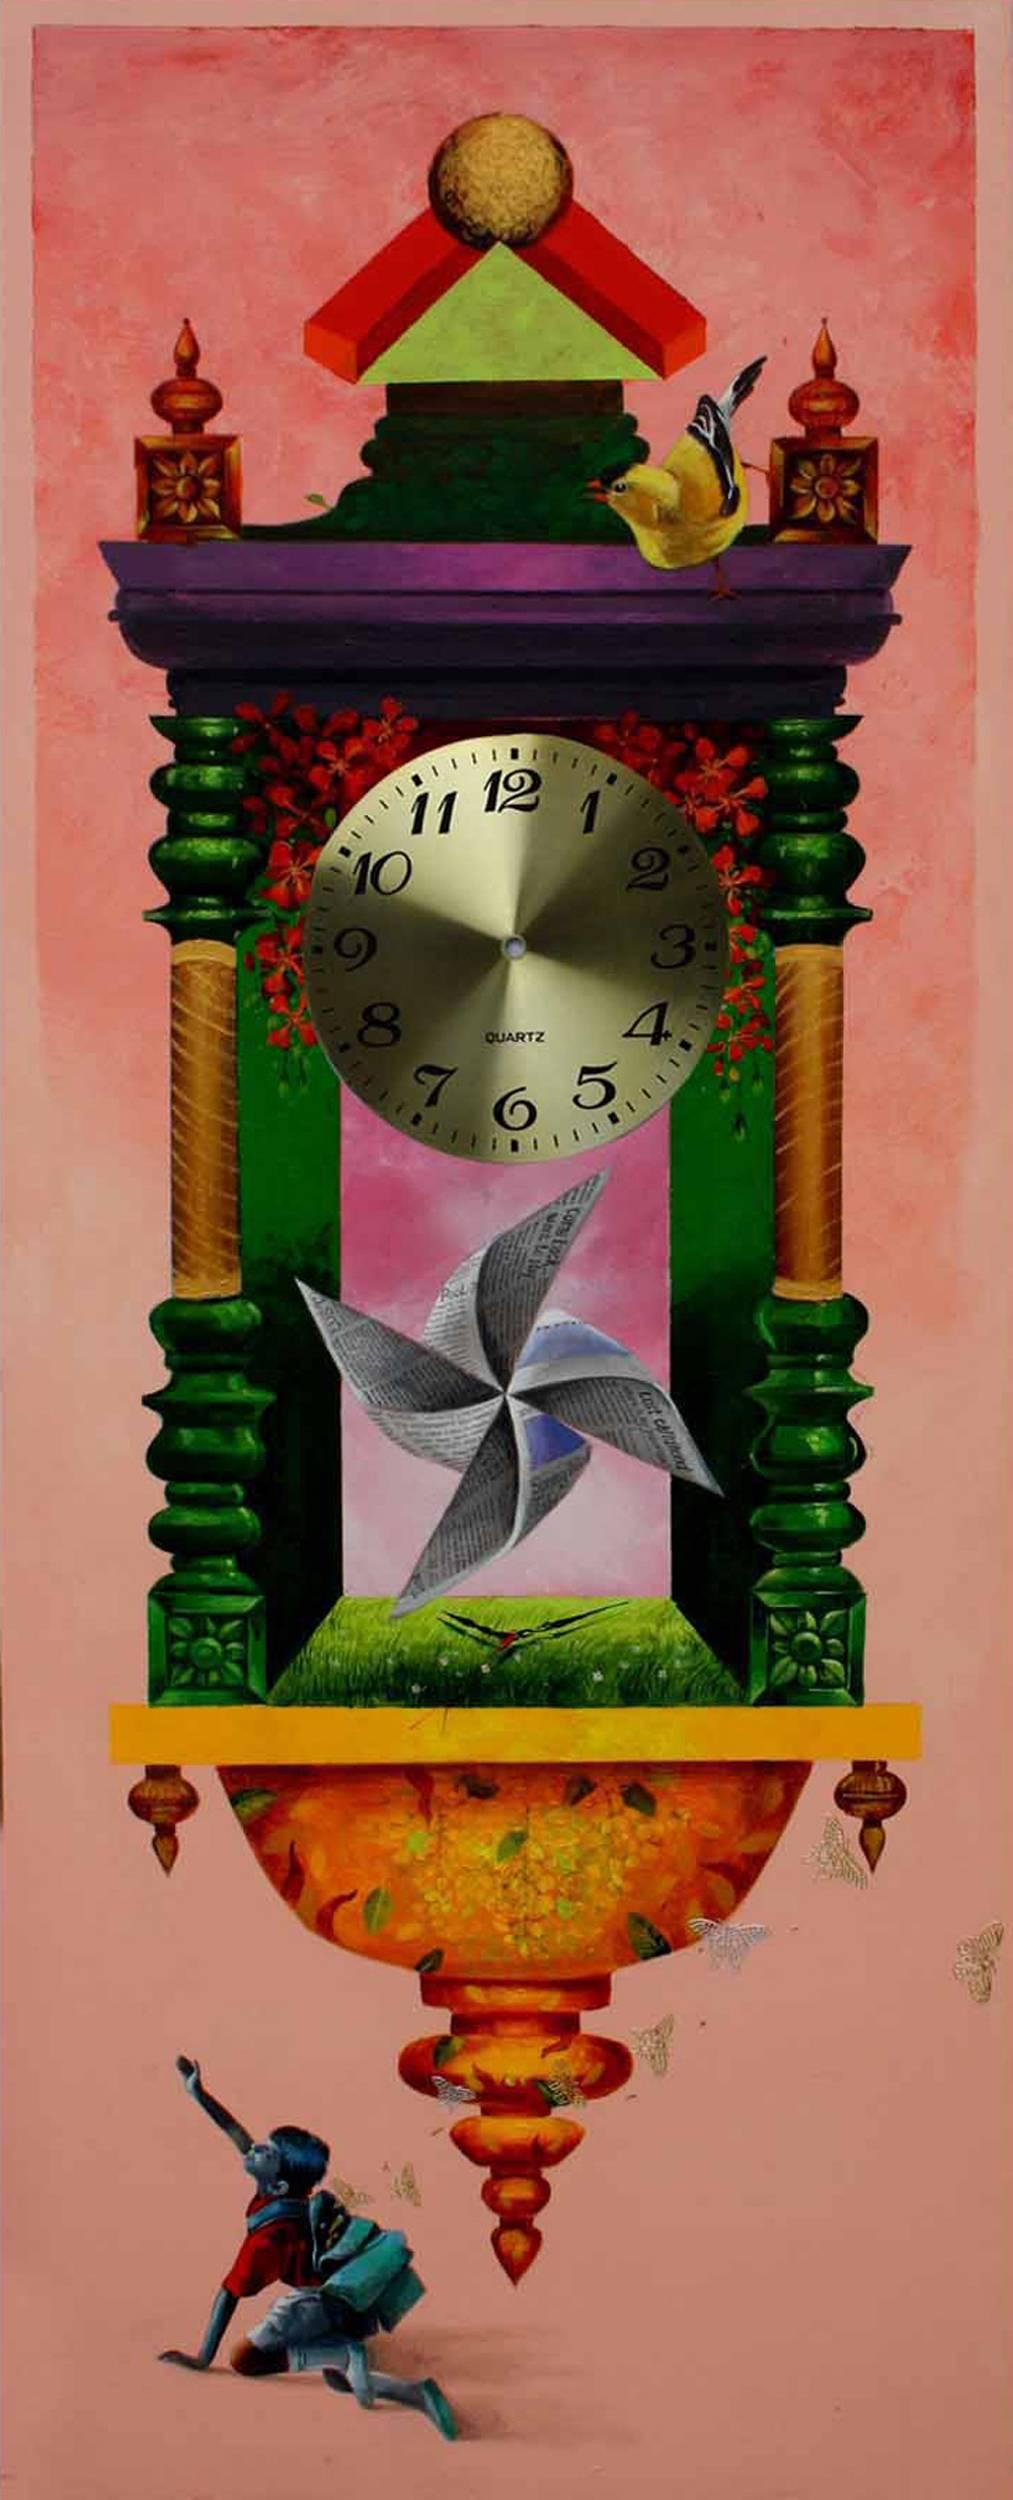 Pradosh Swain Figurative Painting - Longing Past IV : Wall Clock, Pink, Metalic color, Acrylic Painting "In Stock"